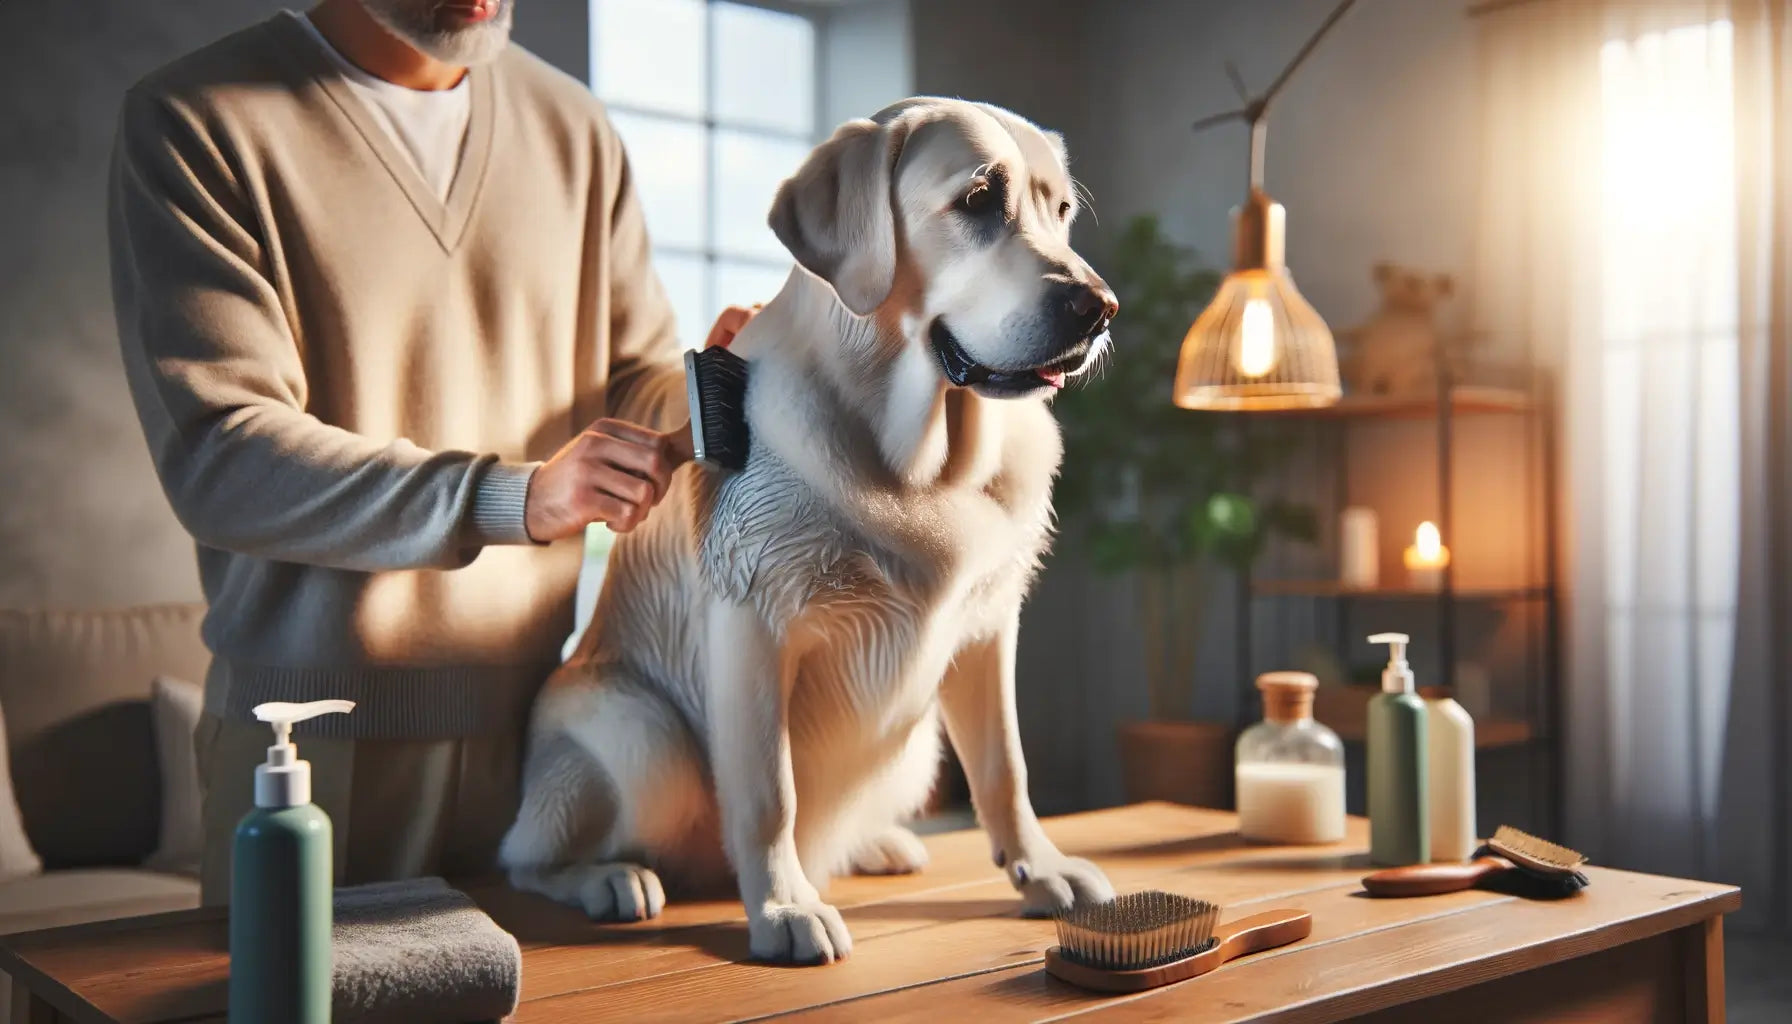 A Silver Lab being groomed by its owner in a home environment.